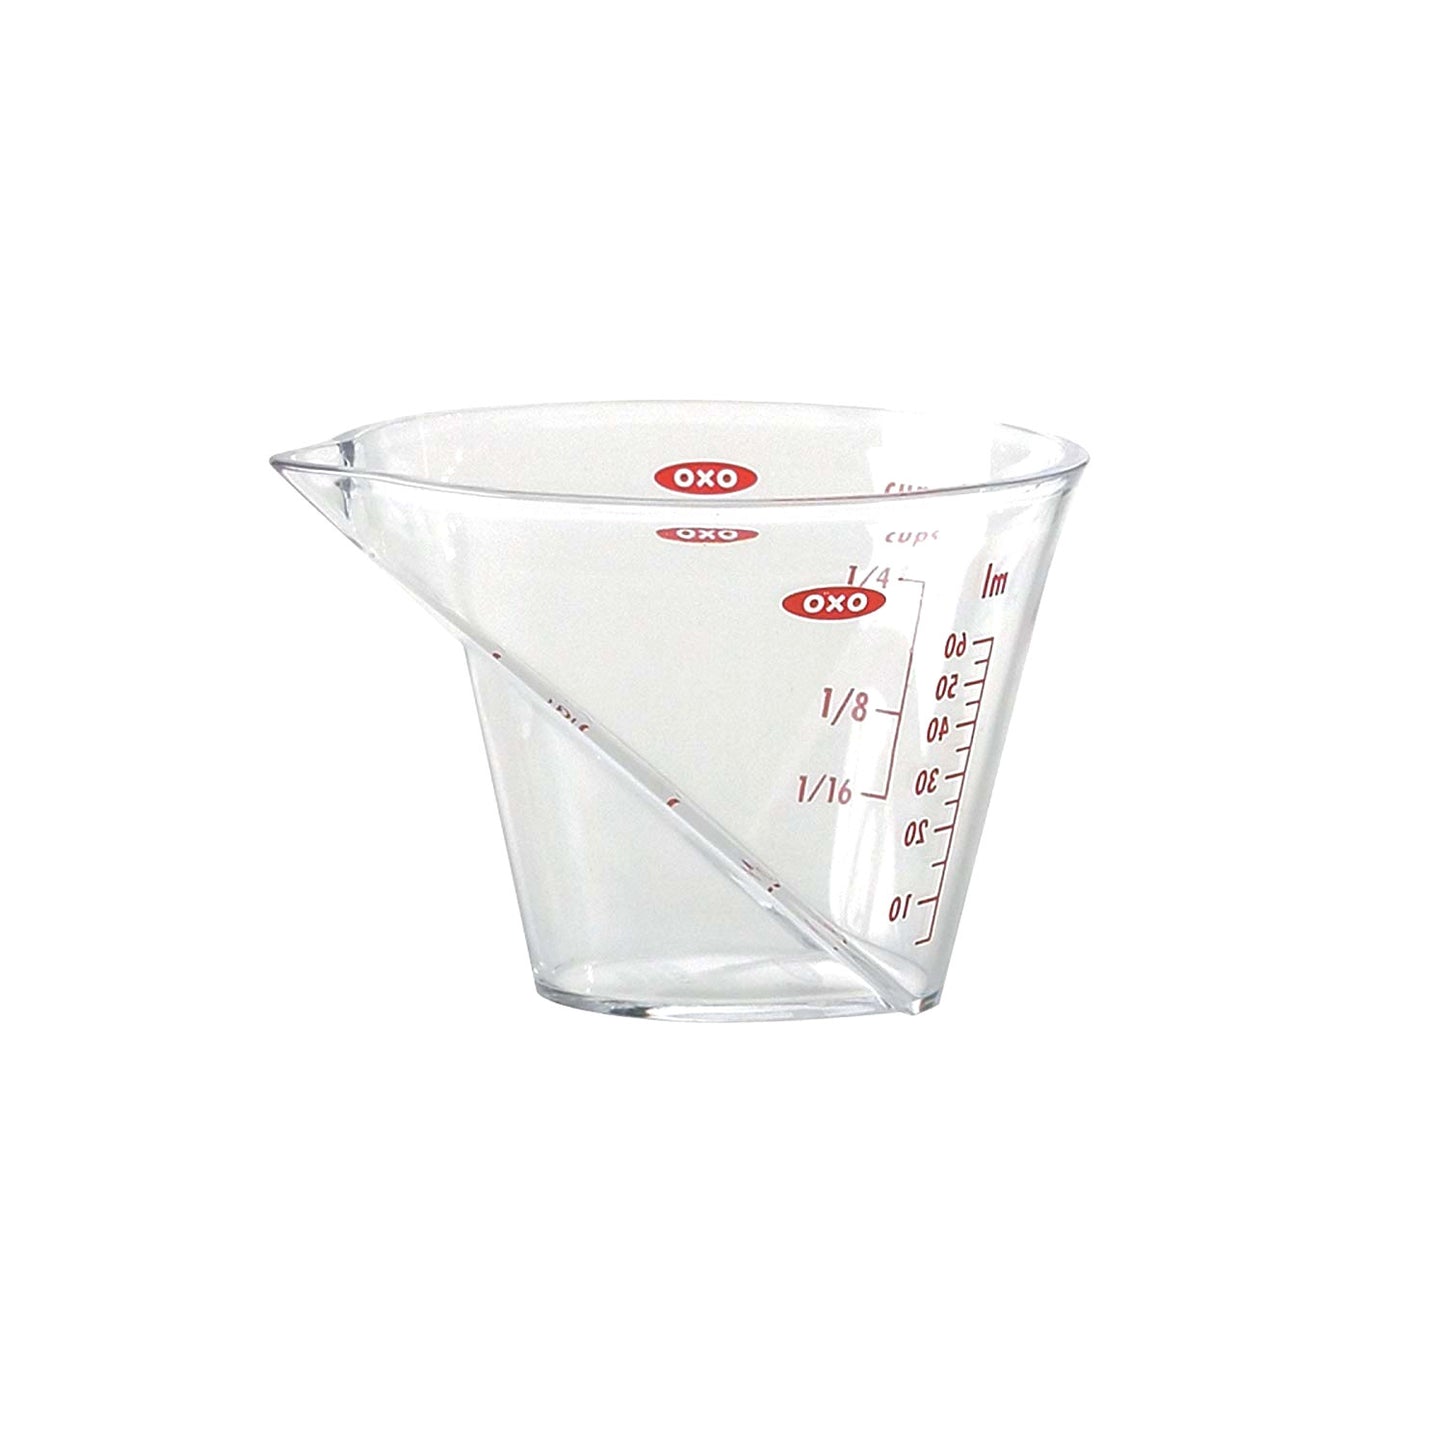 Mini Angled Measuring Cup - 1/4 Cup